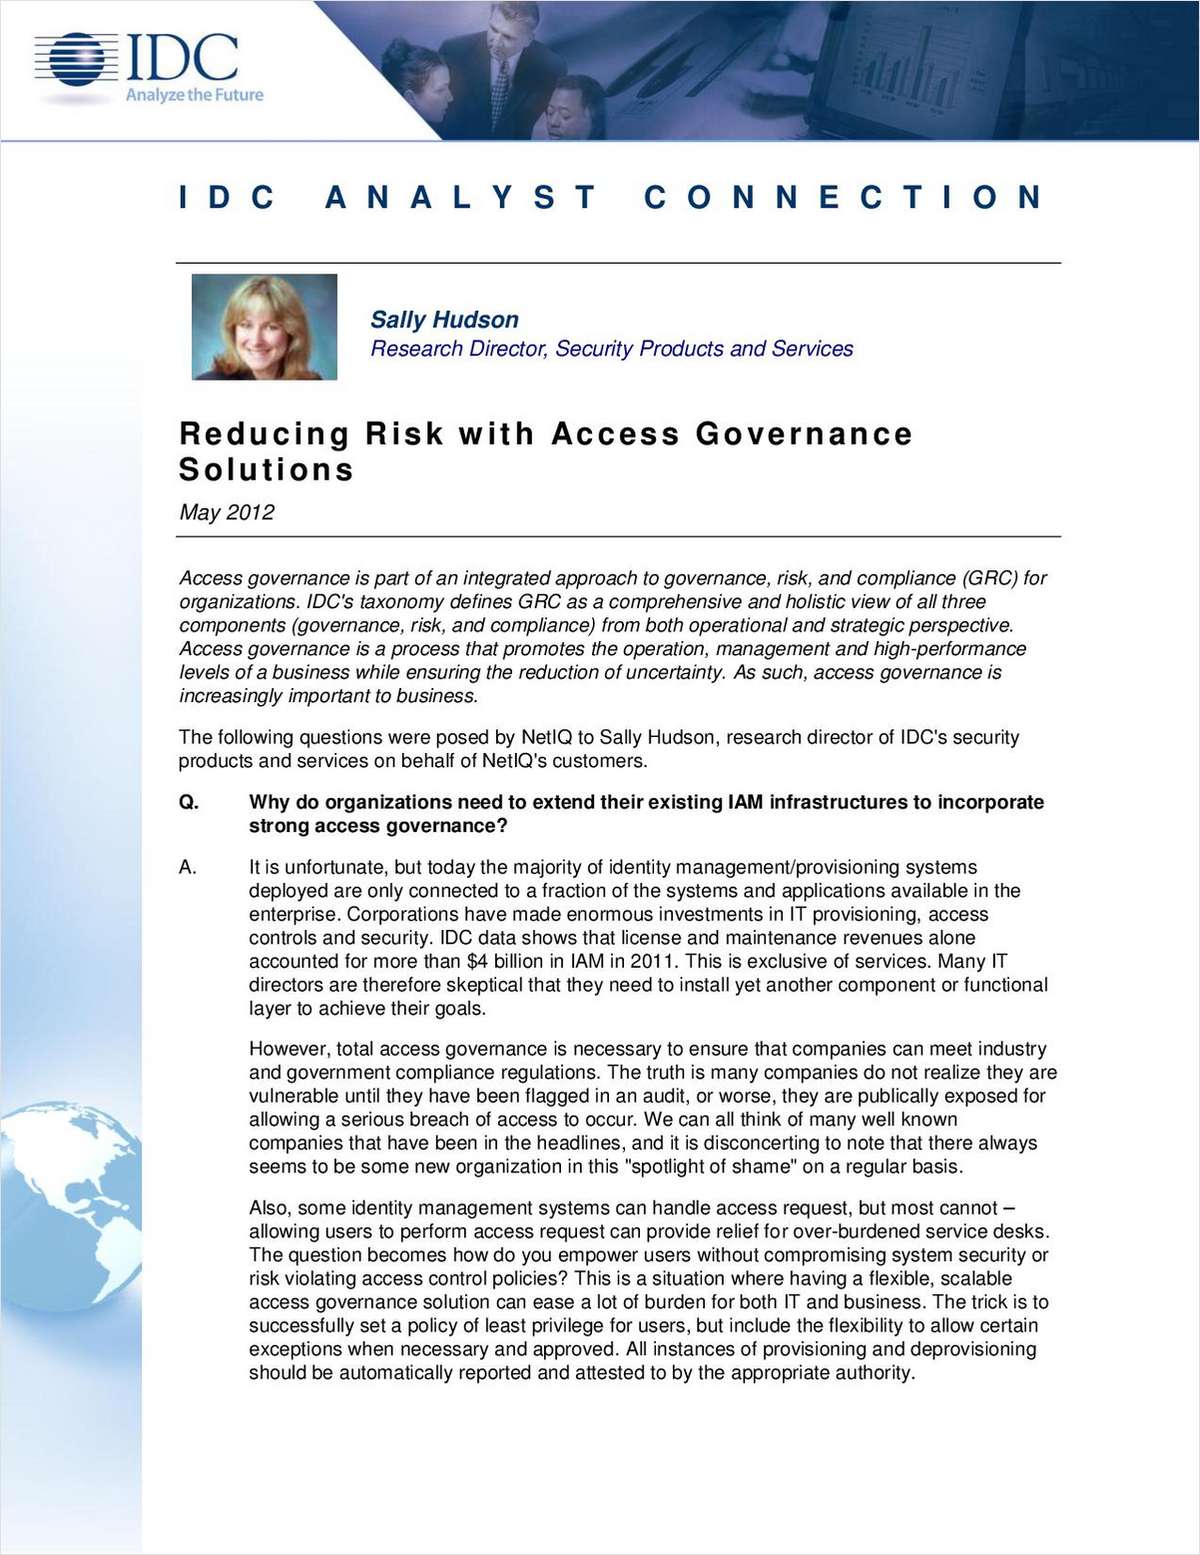 Reducing Risk with Access Governance Solutions